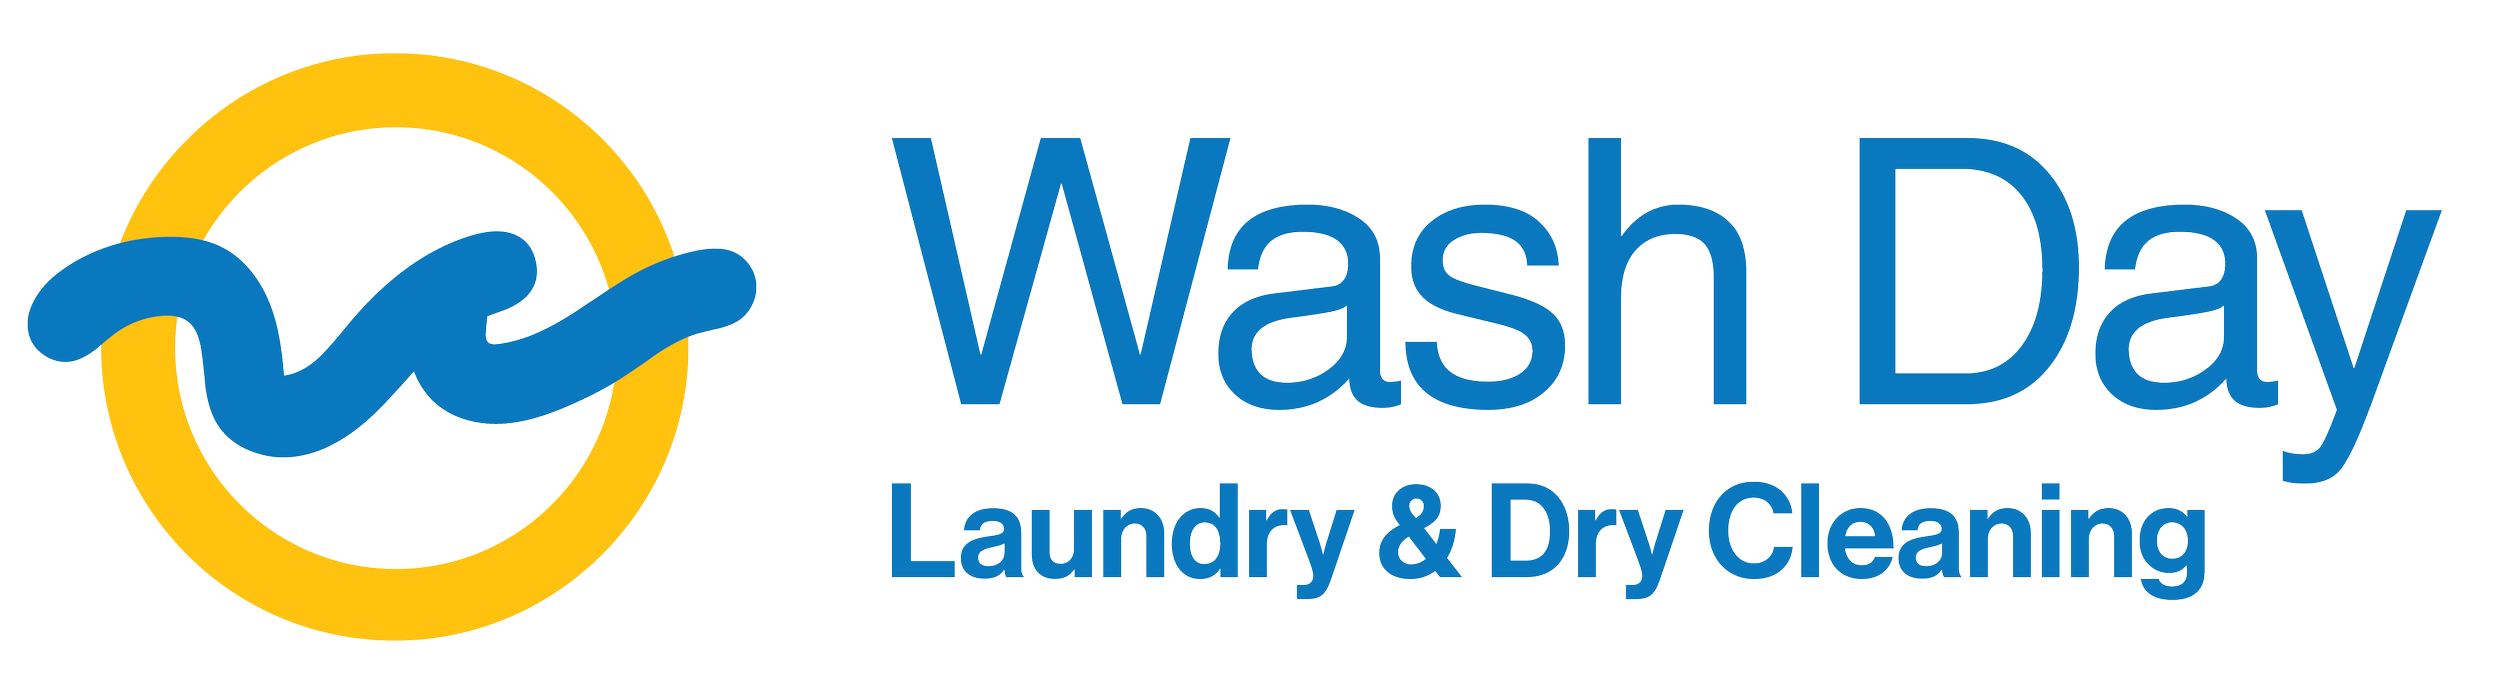 Wash Day Laundry and Dry Cleaning